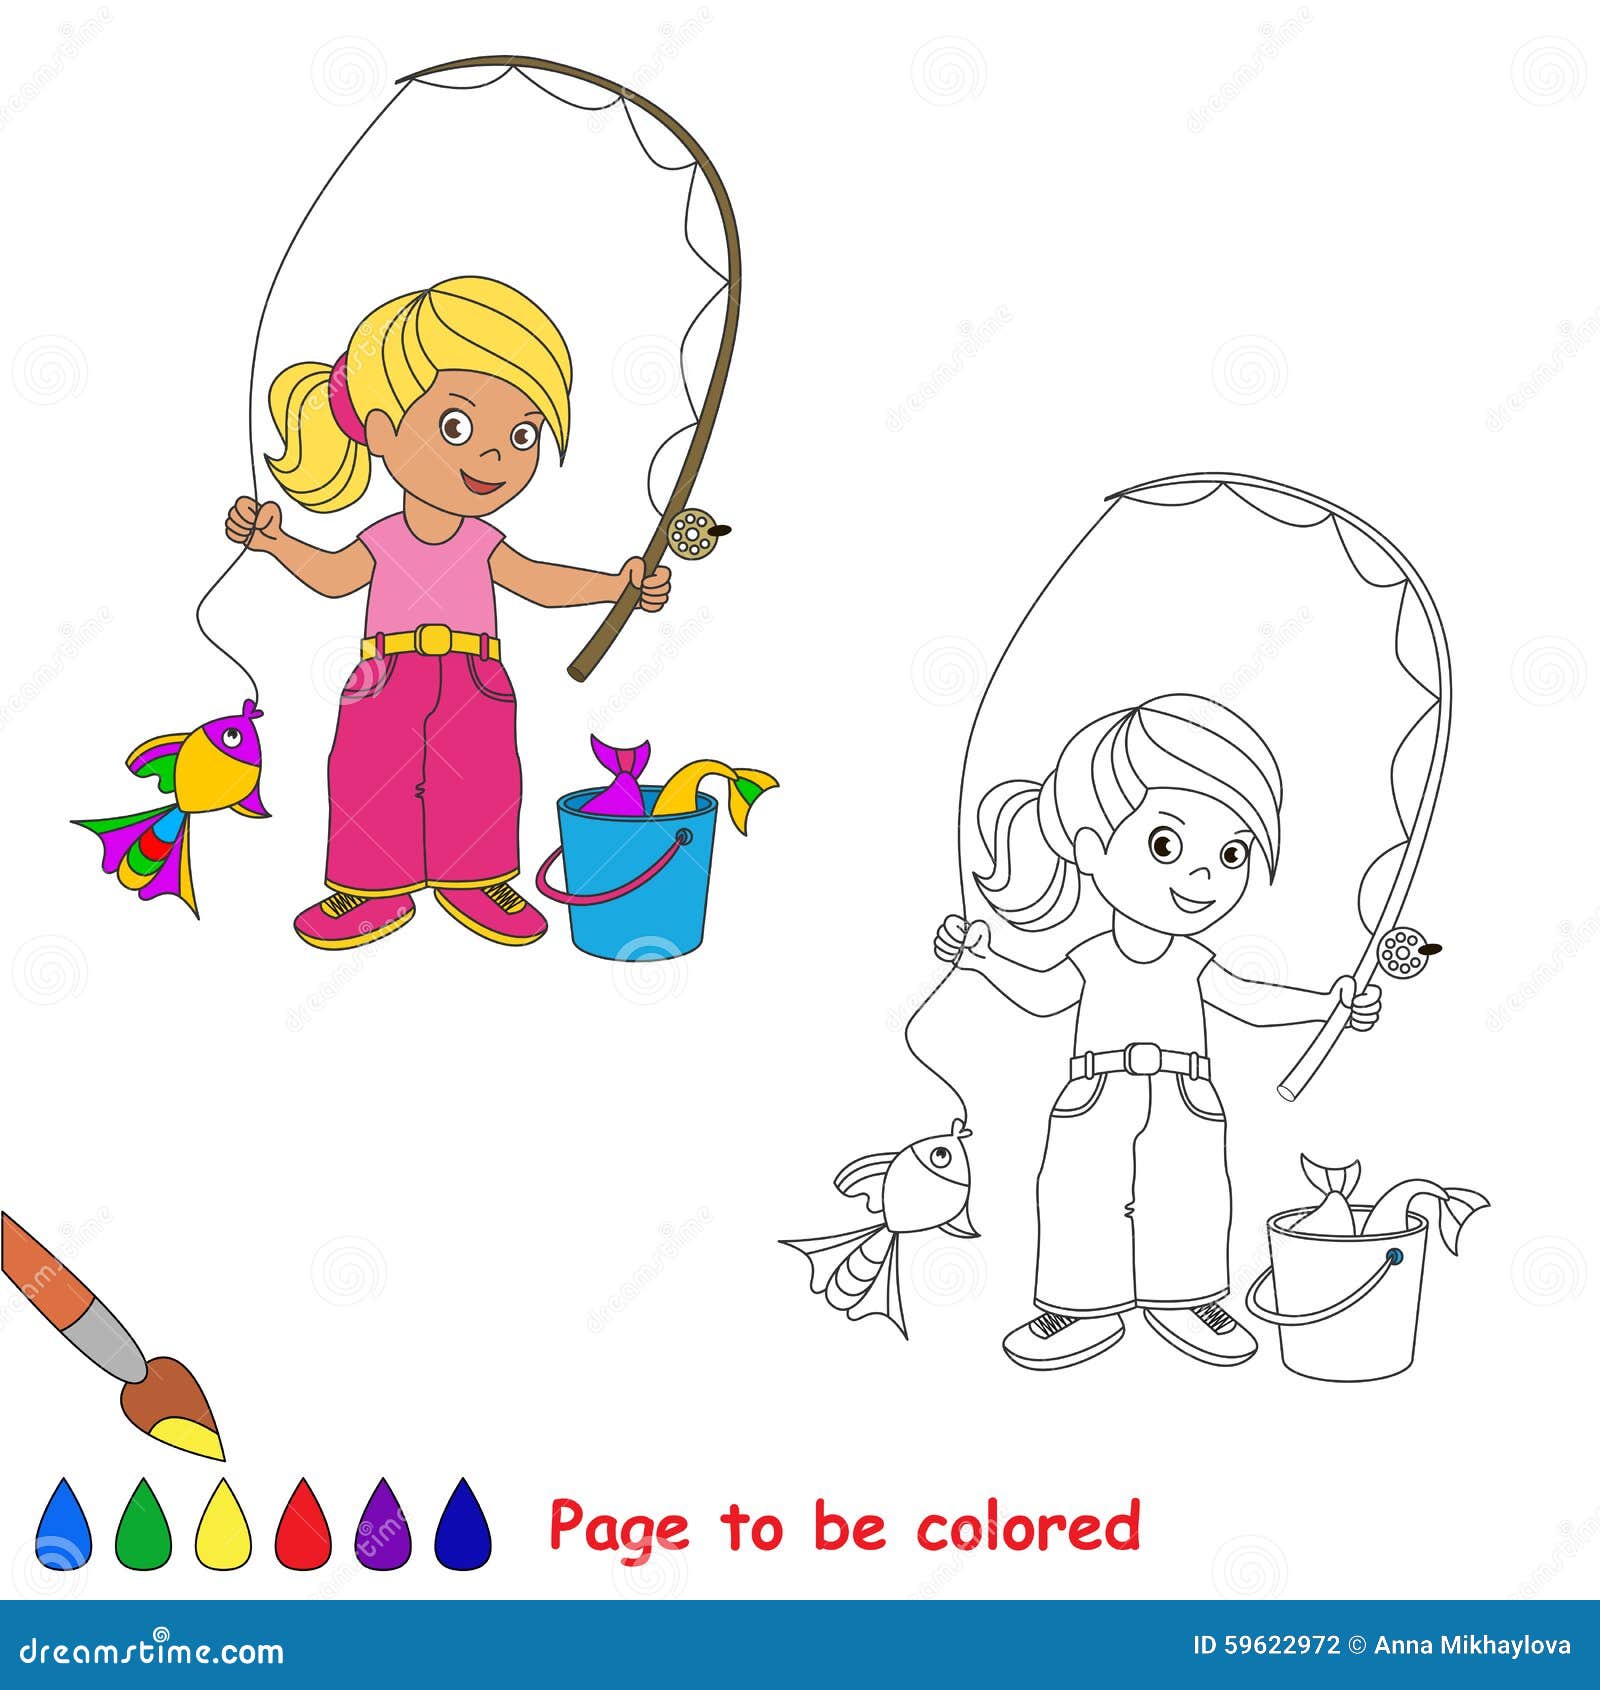 baby fishing outfit - Clip Art Library